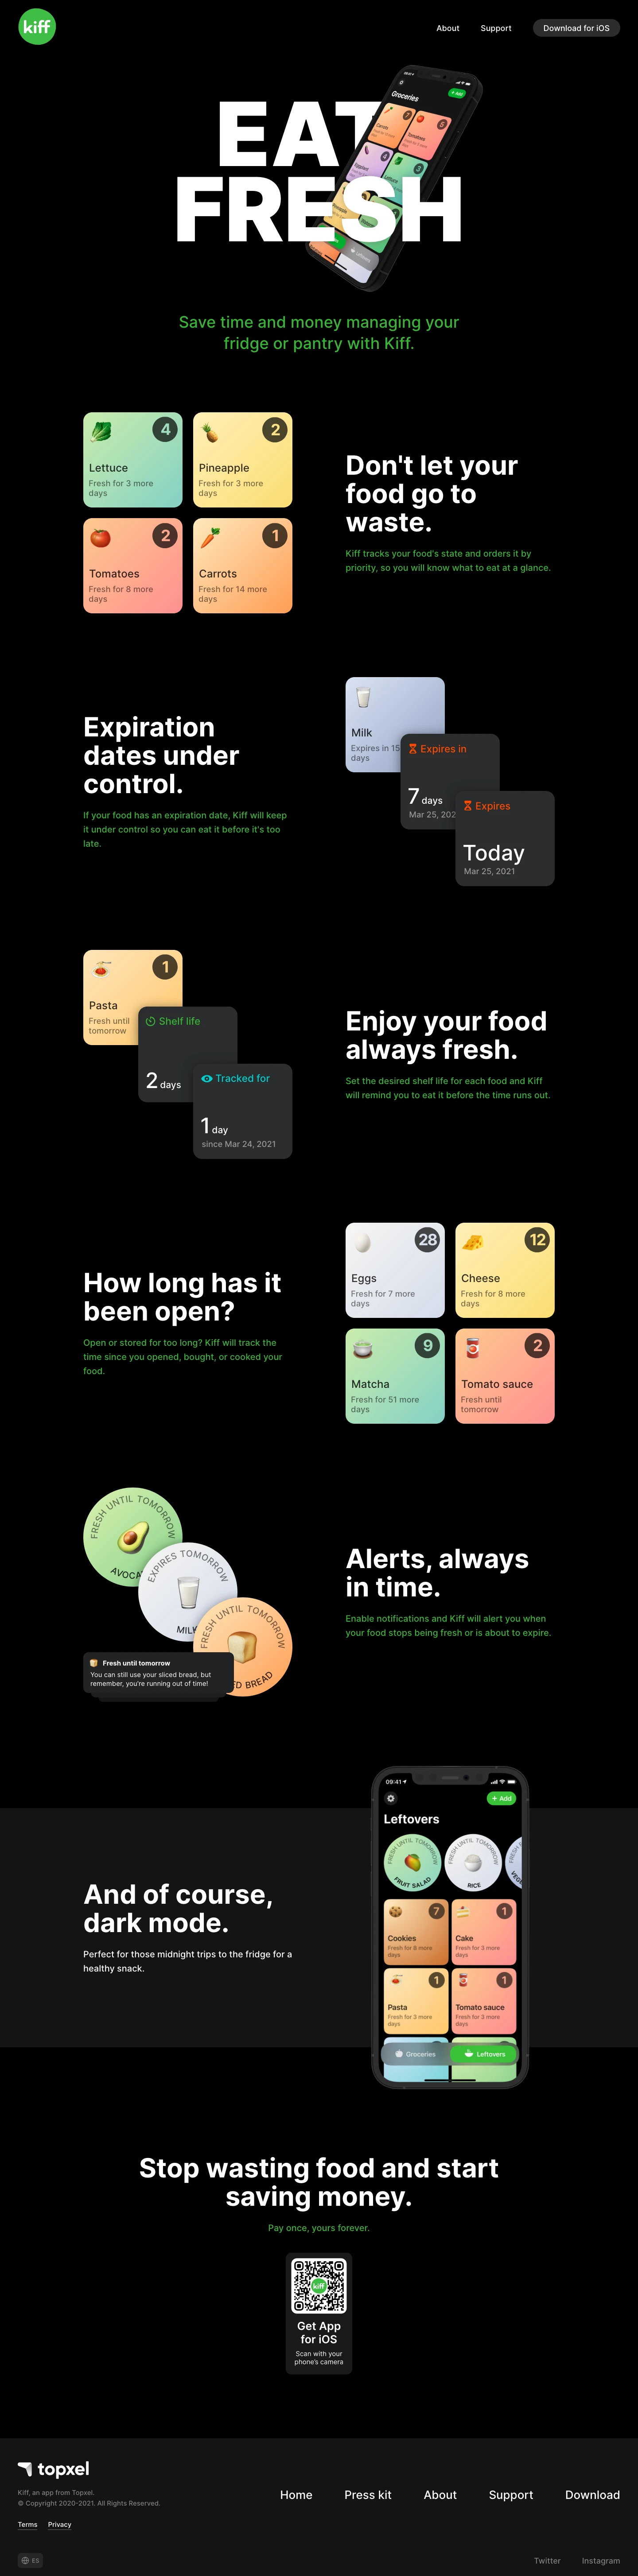 Kiff Landing Page Example: Save time and money managing your fridge or pantry with Kiff. Eat your food always fresh, and don't let anything go to waste.